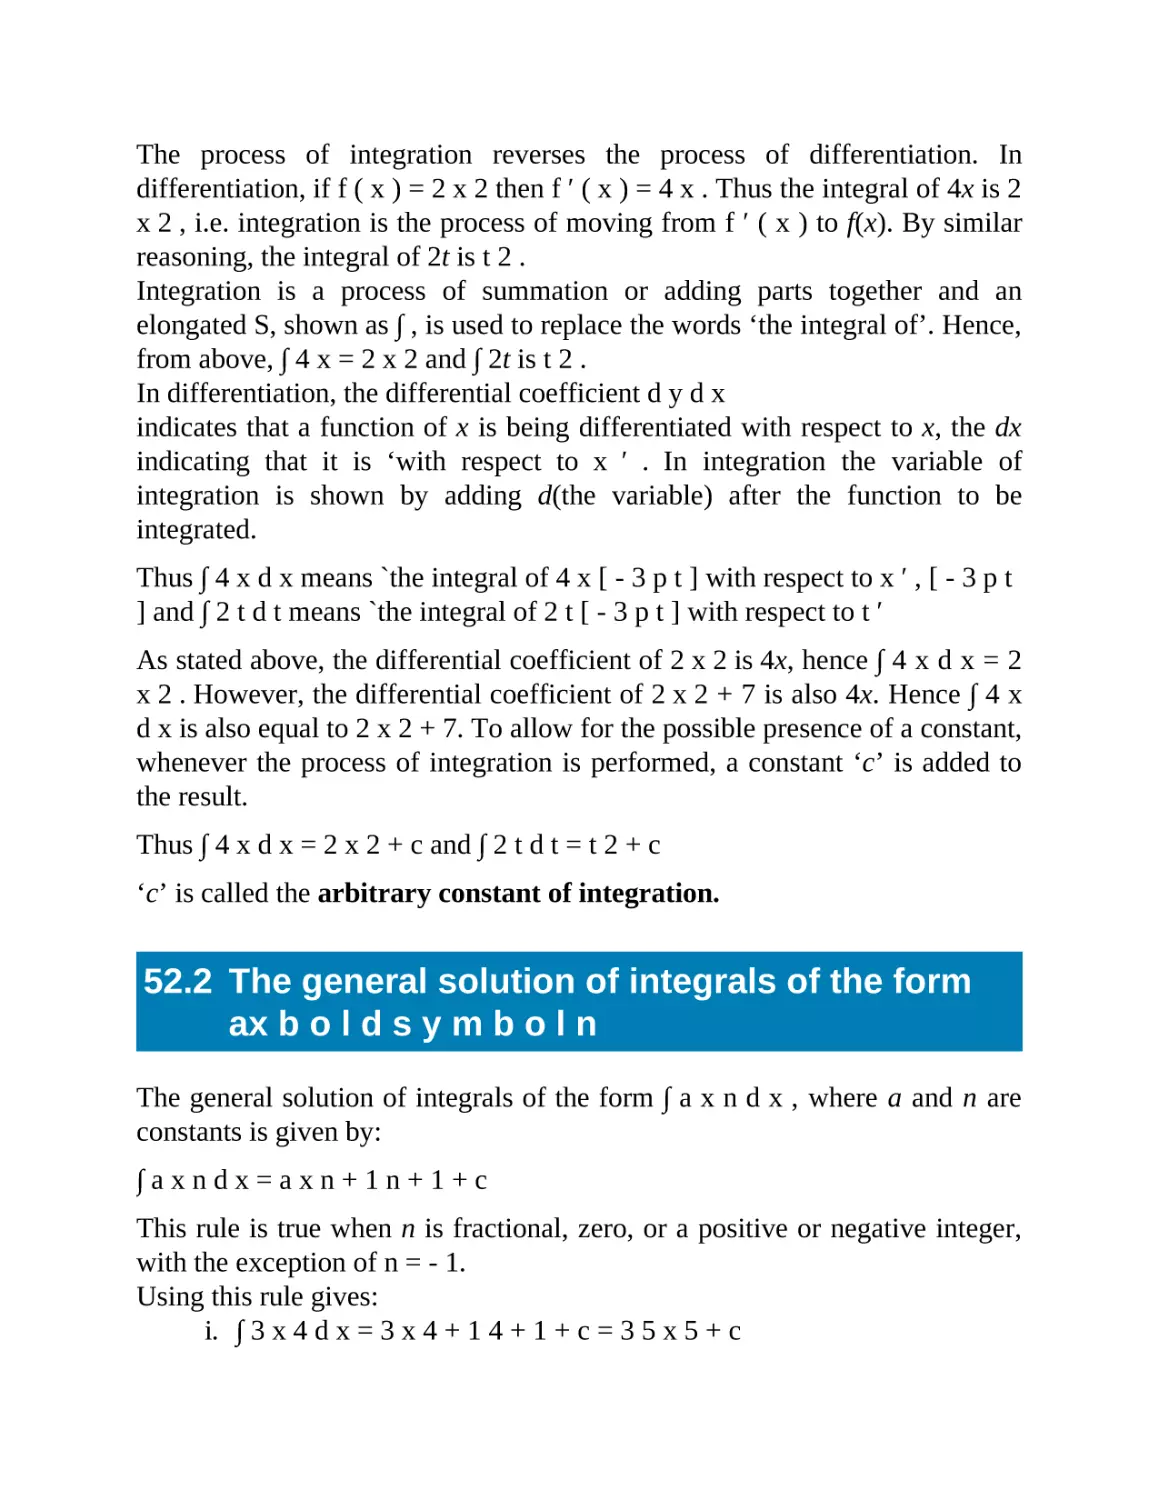 52.2 The general solution of integrals of the form ax